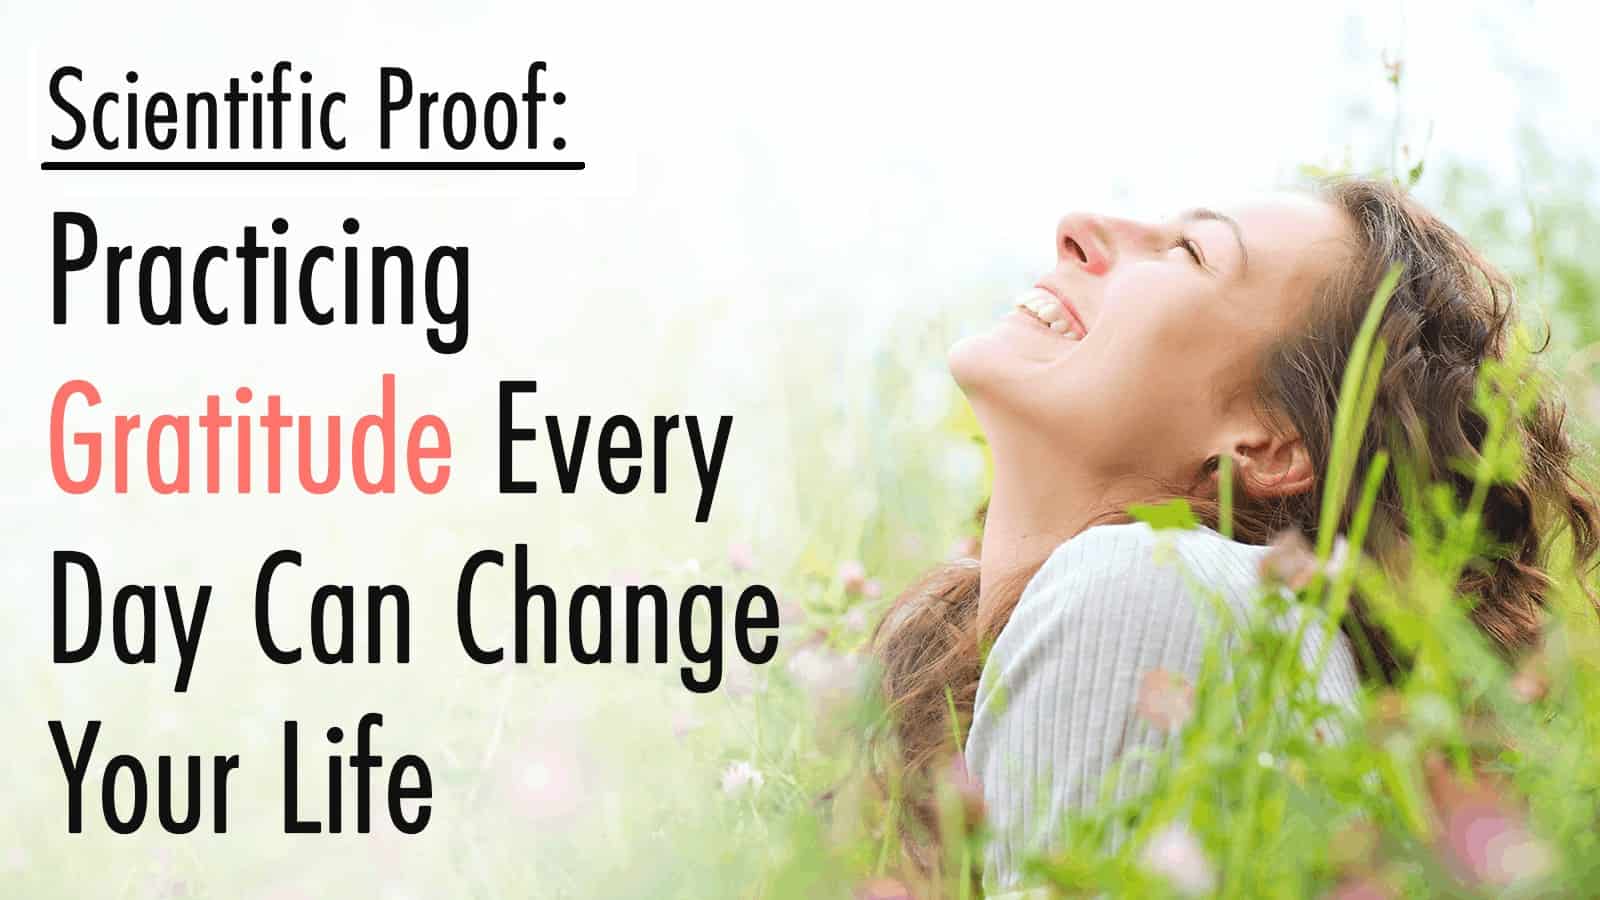 Scientific Proof: Practicing Gratitude Every Day Can Change Your Life